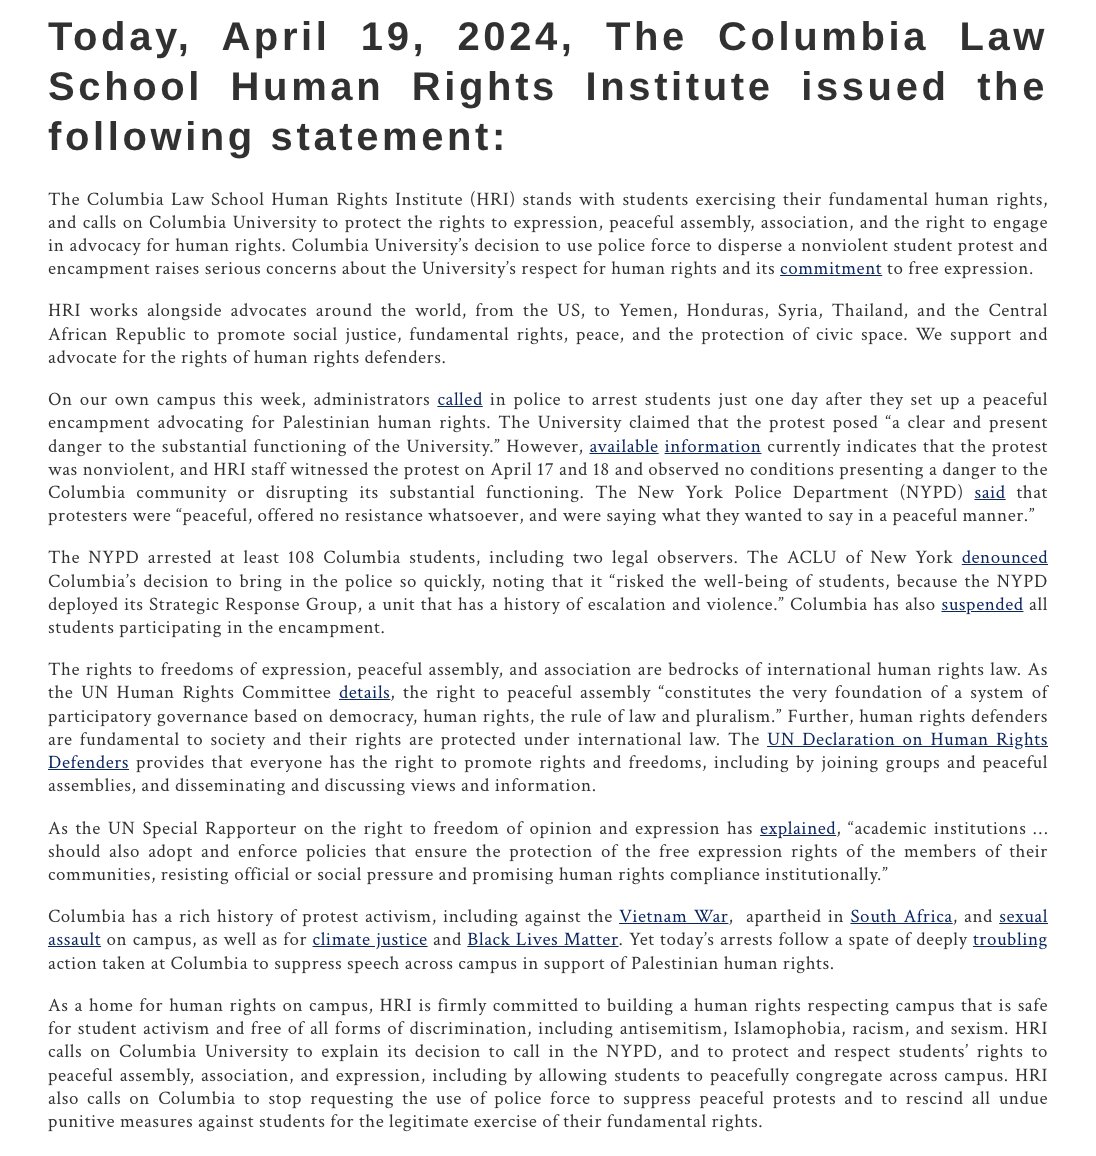 Columbia Law School Human Rights Institute: 'Columbia University’s decision to use police force to disperse a nonviolent student protest and encampment raises serious concerns about the University’s respect for human rights and its commitment to free expression.'